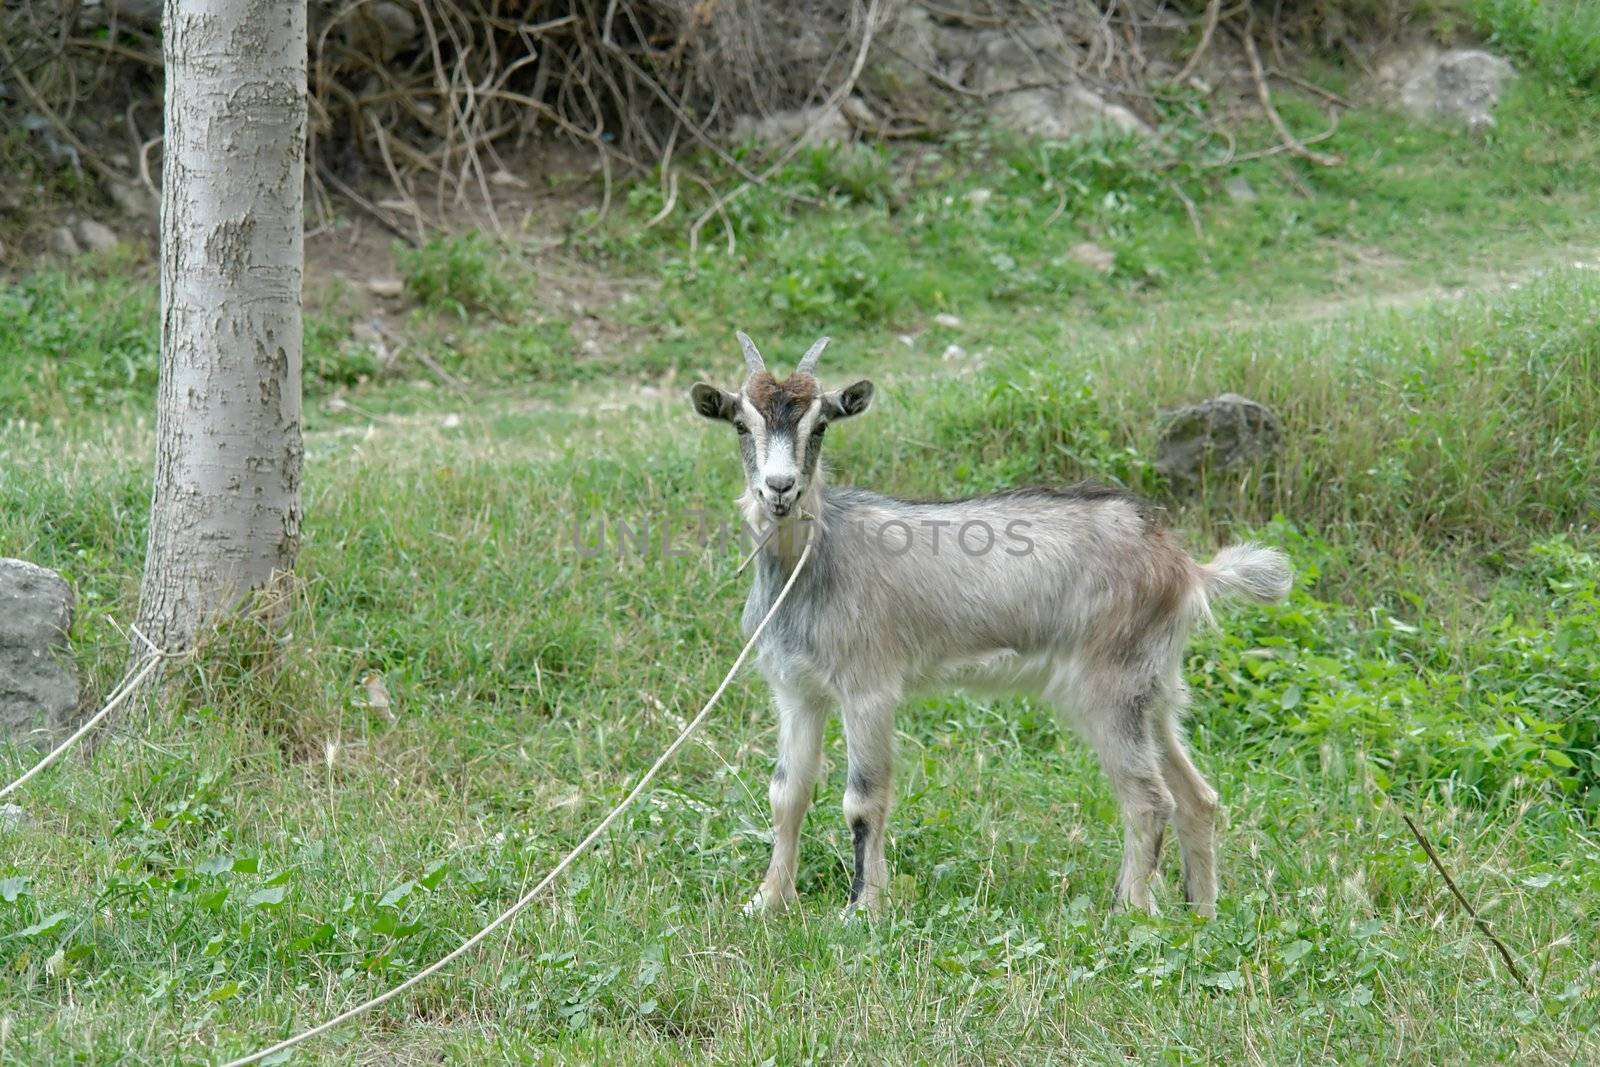 Small gray goat on the leash looks into the objective